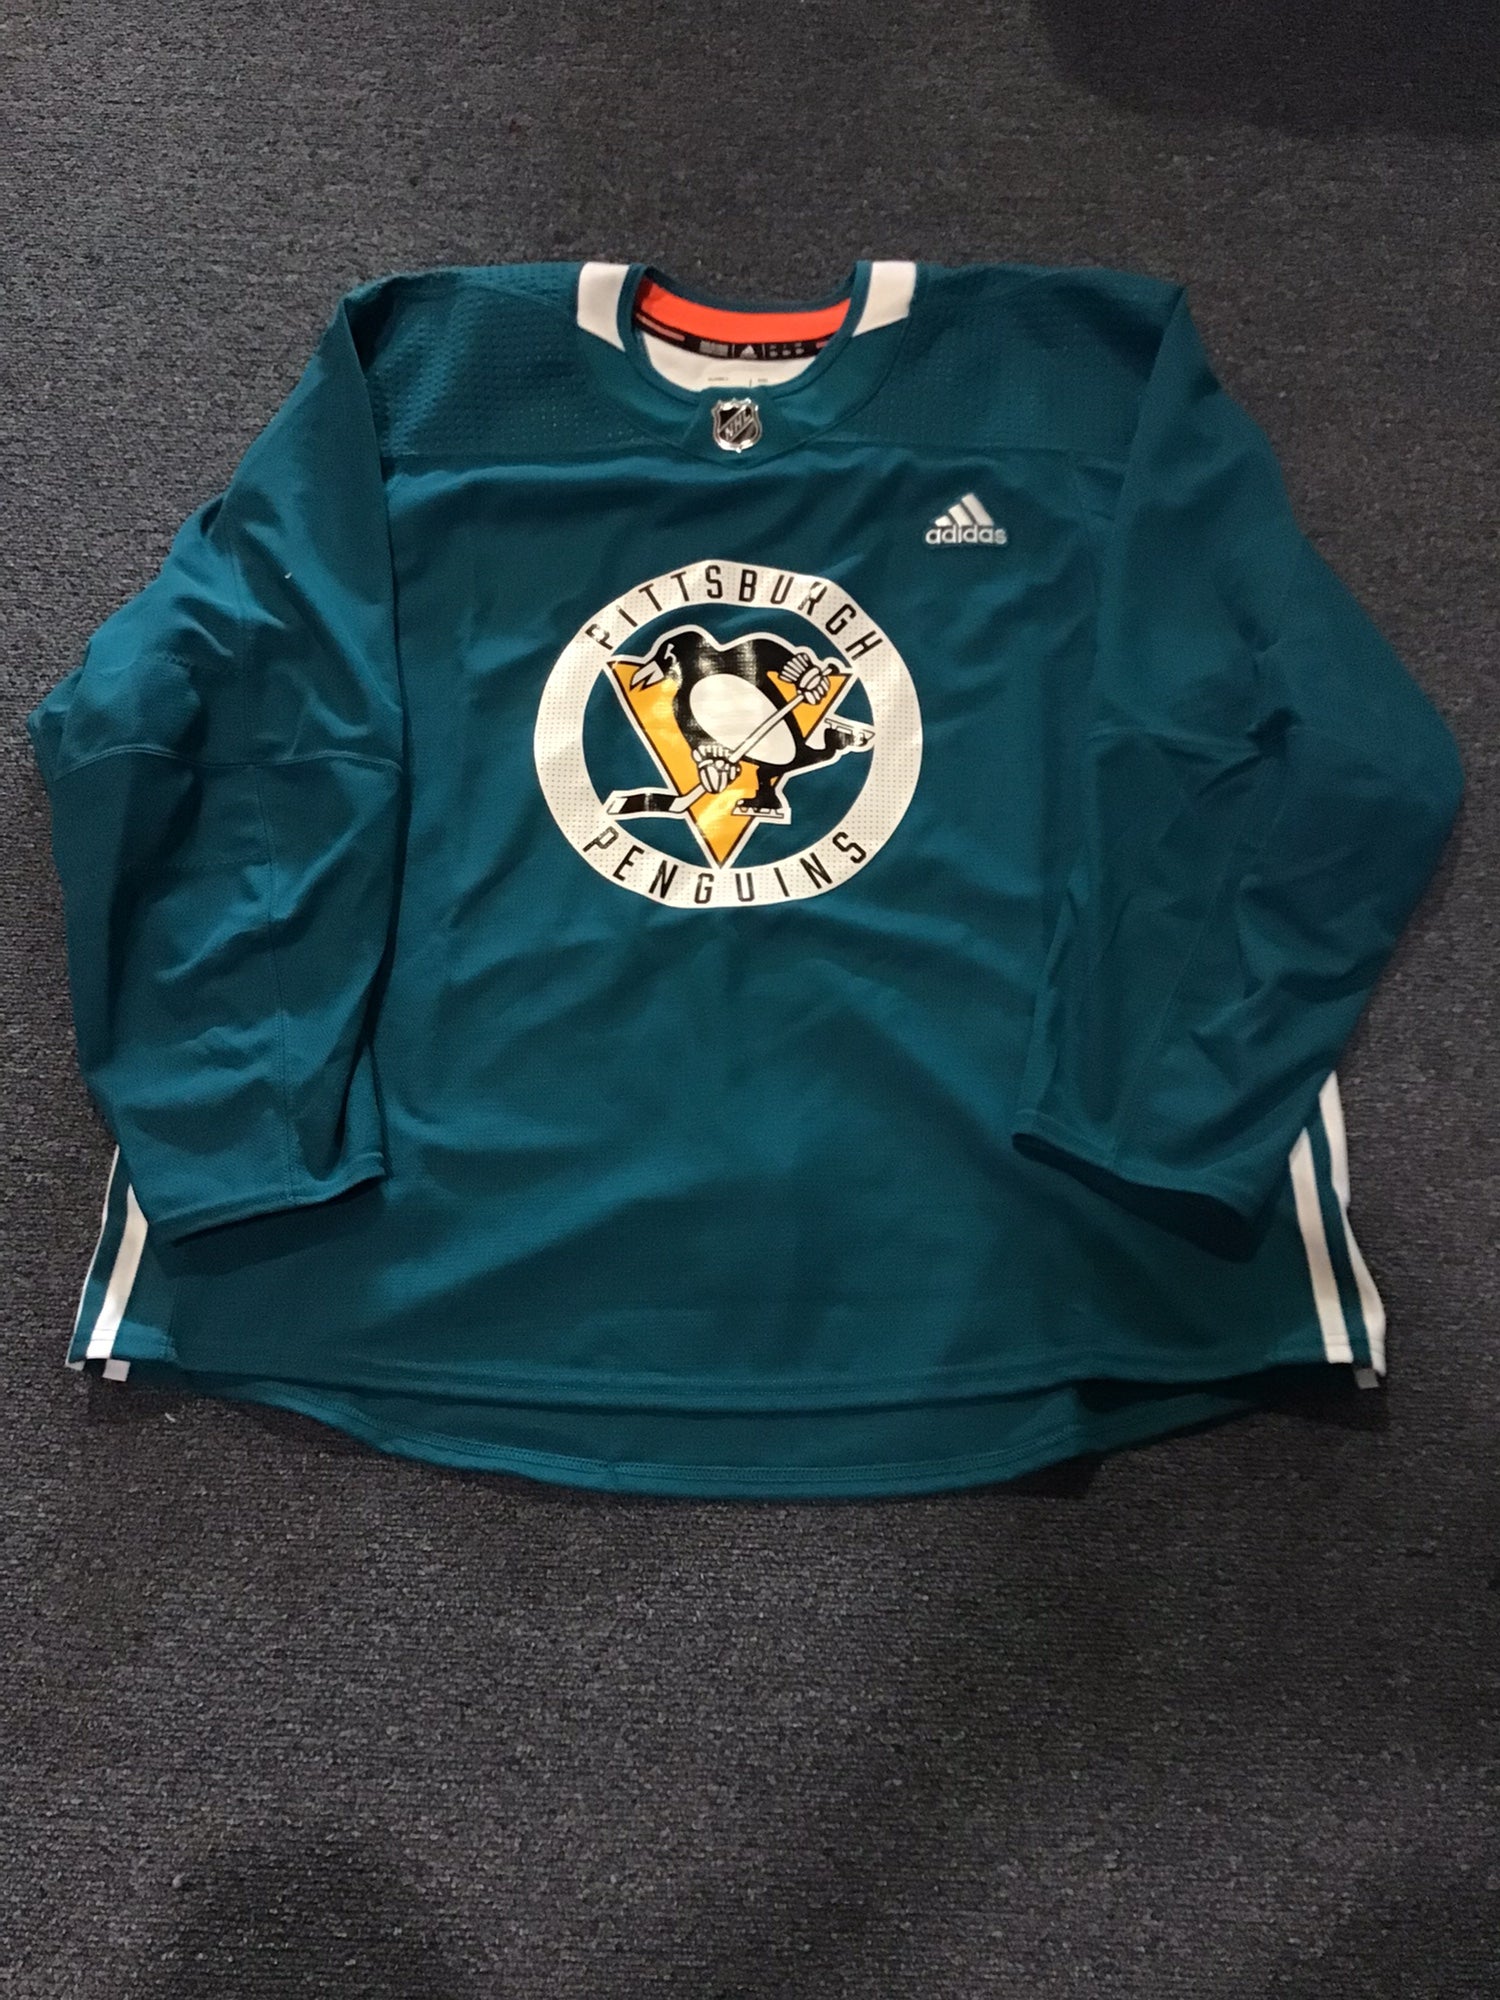 Is this an authentic jersey ? : r/penguins